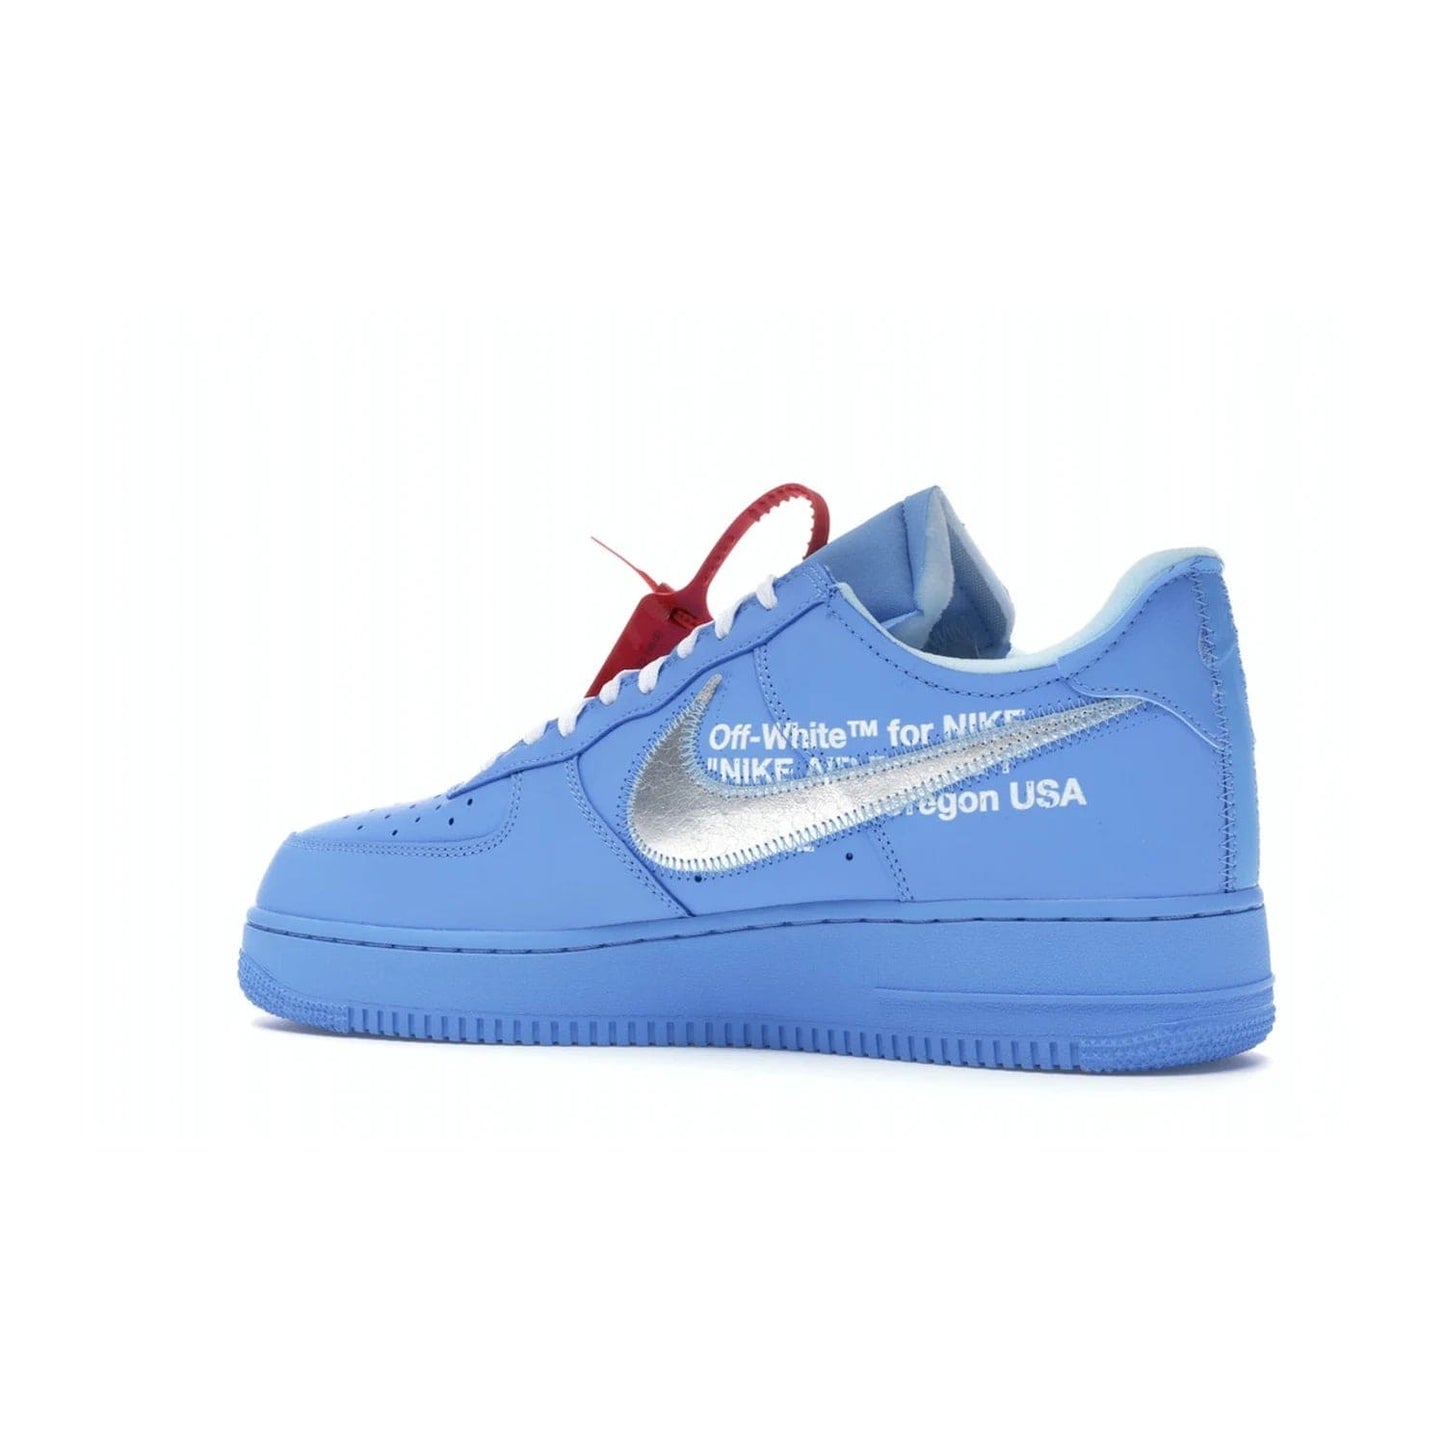 Nike Air Force 1 Low Off-White MCA University Blue - Image 22 - Only at www.BallersClubKickz.com - Virgil Abloh's Air Force 1 Low Off-White MCA University Blue: Features University Blue leather and midsole, reflective silver Nike Swoosh, red zip tie, white laces, and iconic Off-White™ branding. A must-have for any Virgil Abloh enthusiast.